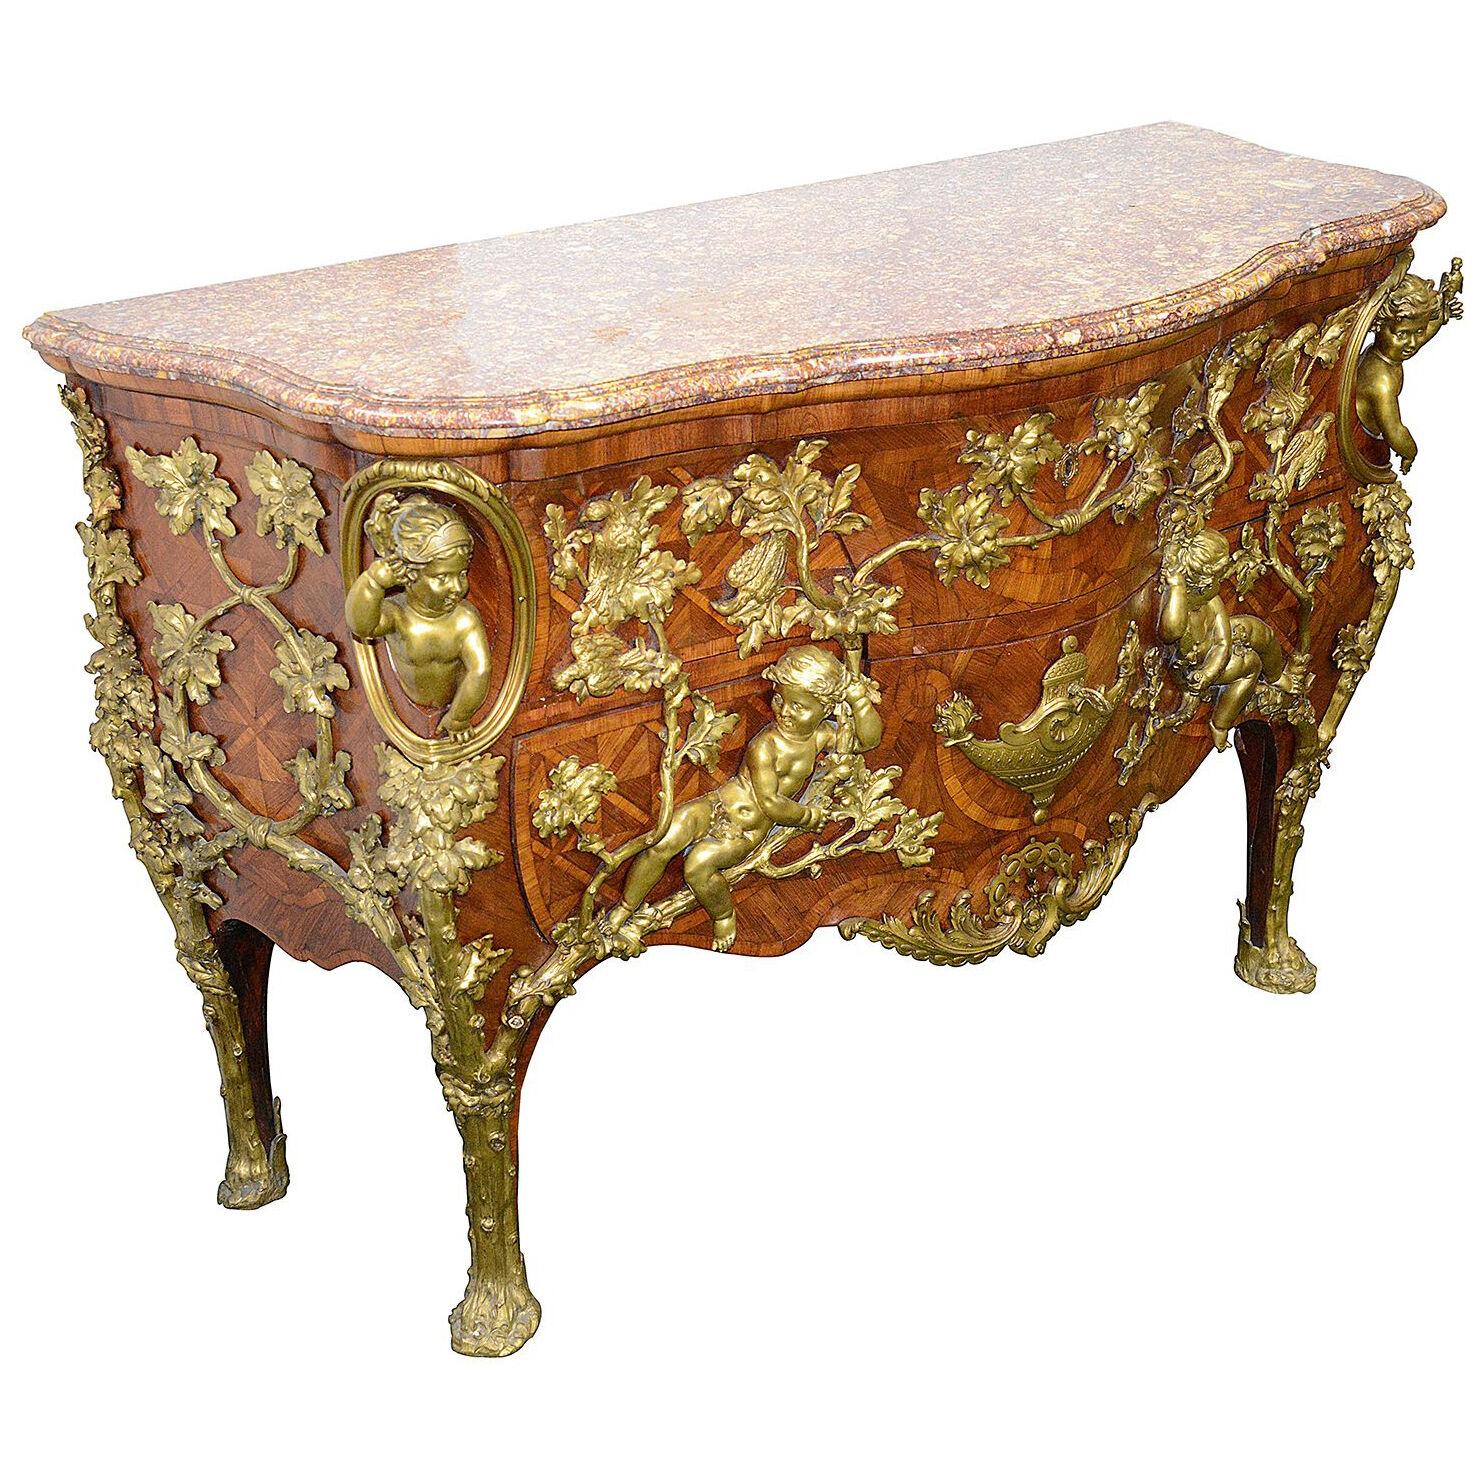 Important 19th Century Charles Cressant influenced commode.